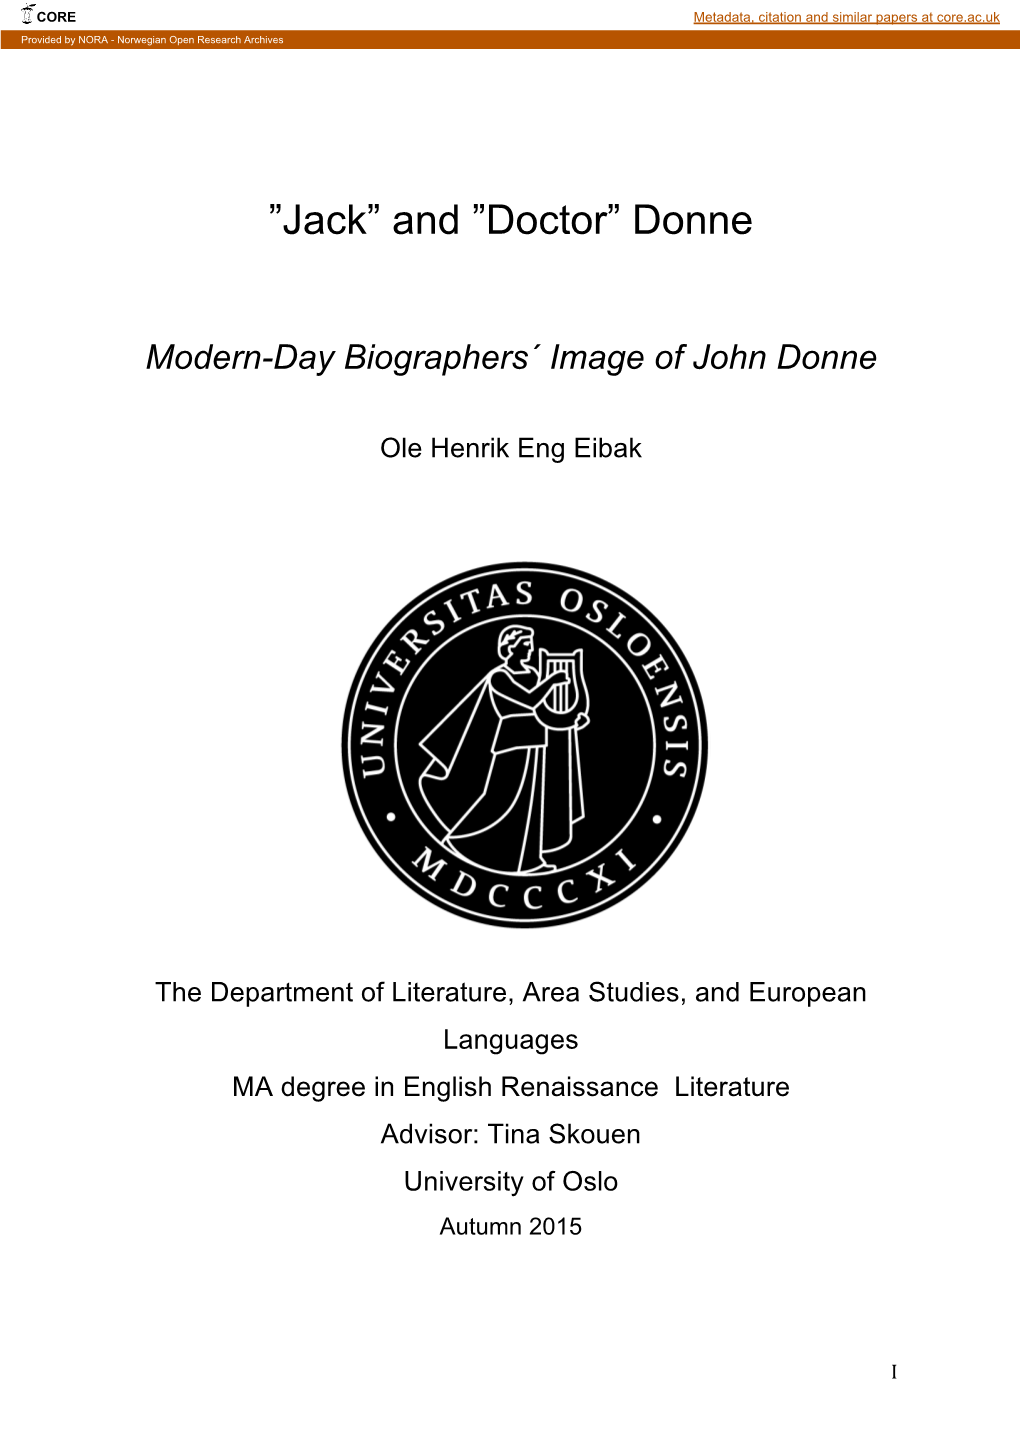 Jack” and ”Doctor” Donne